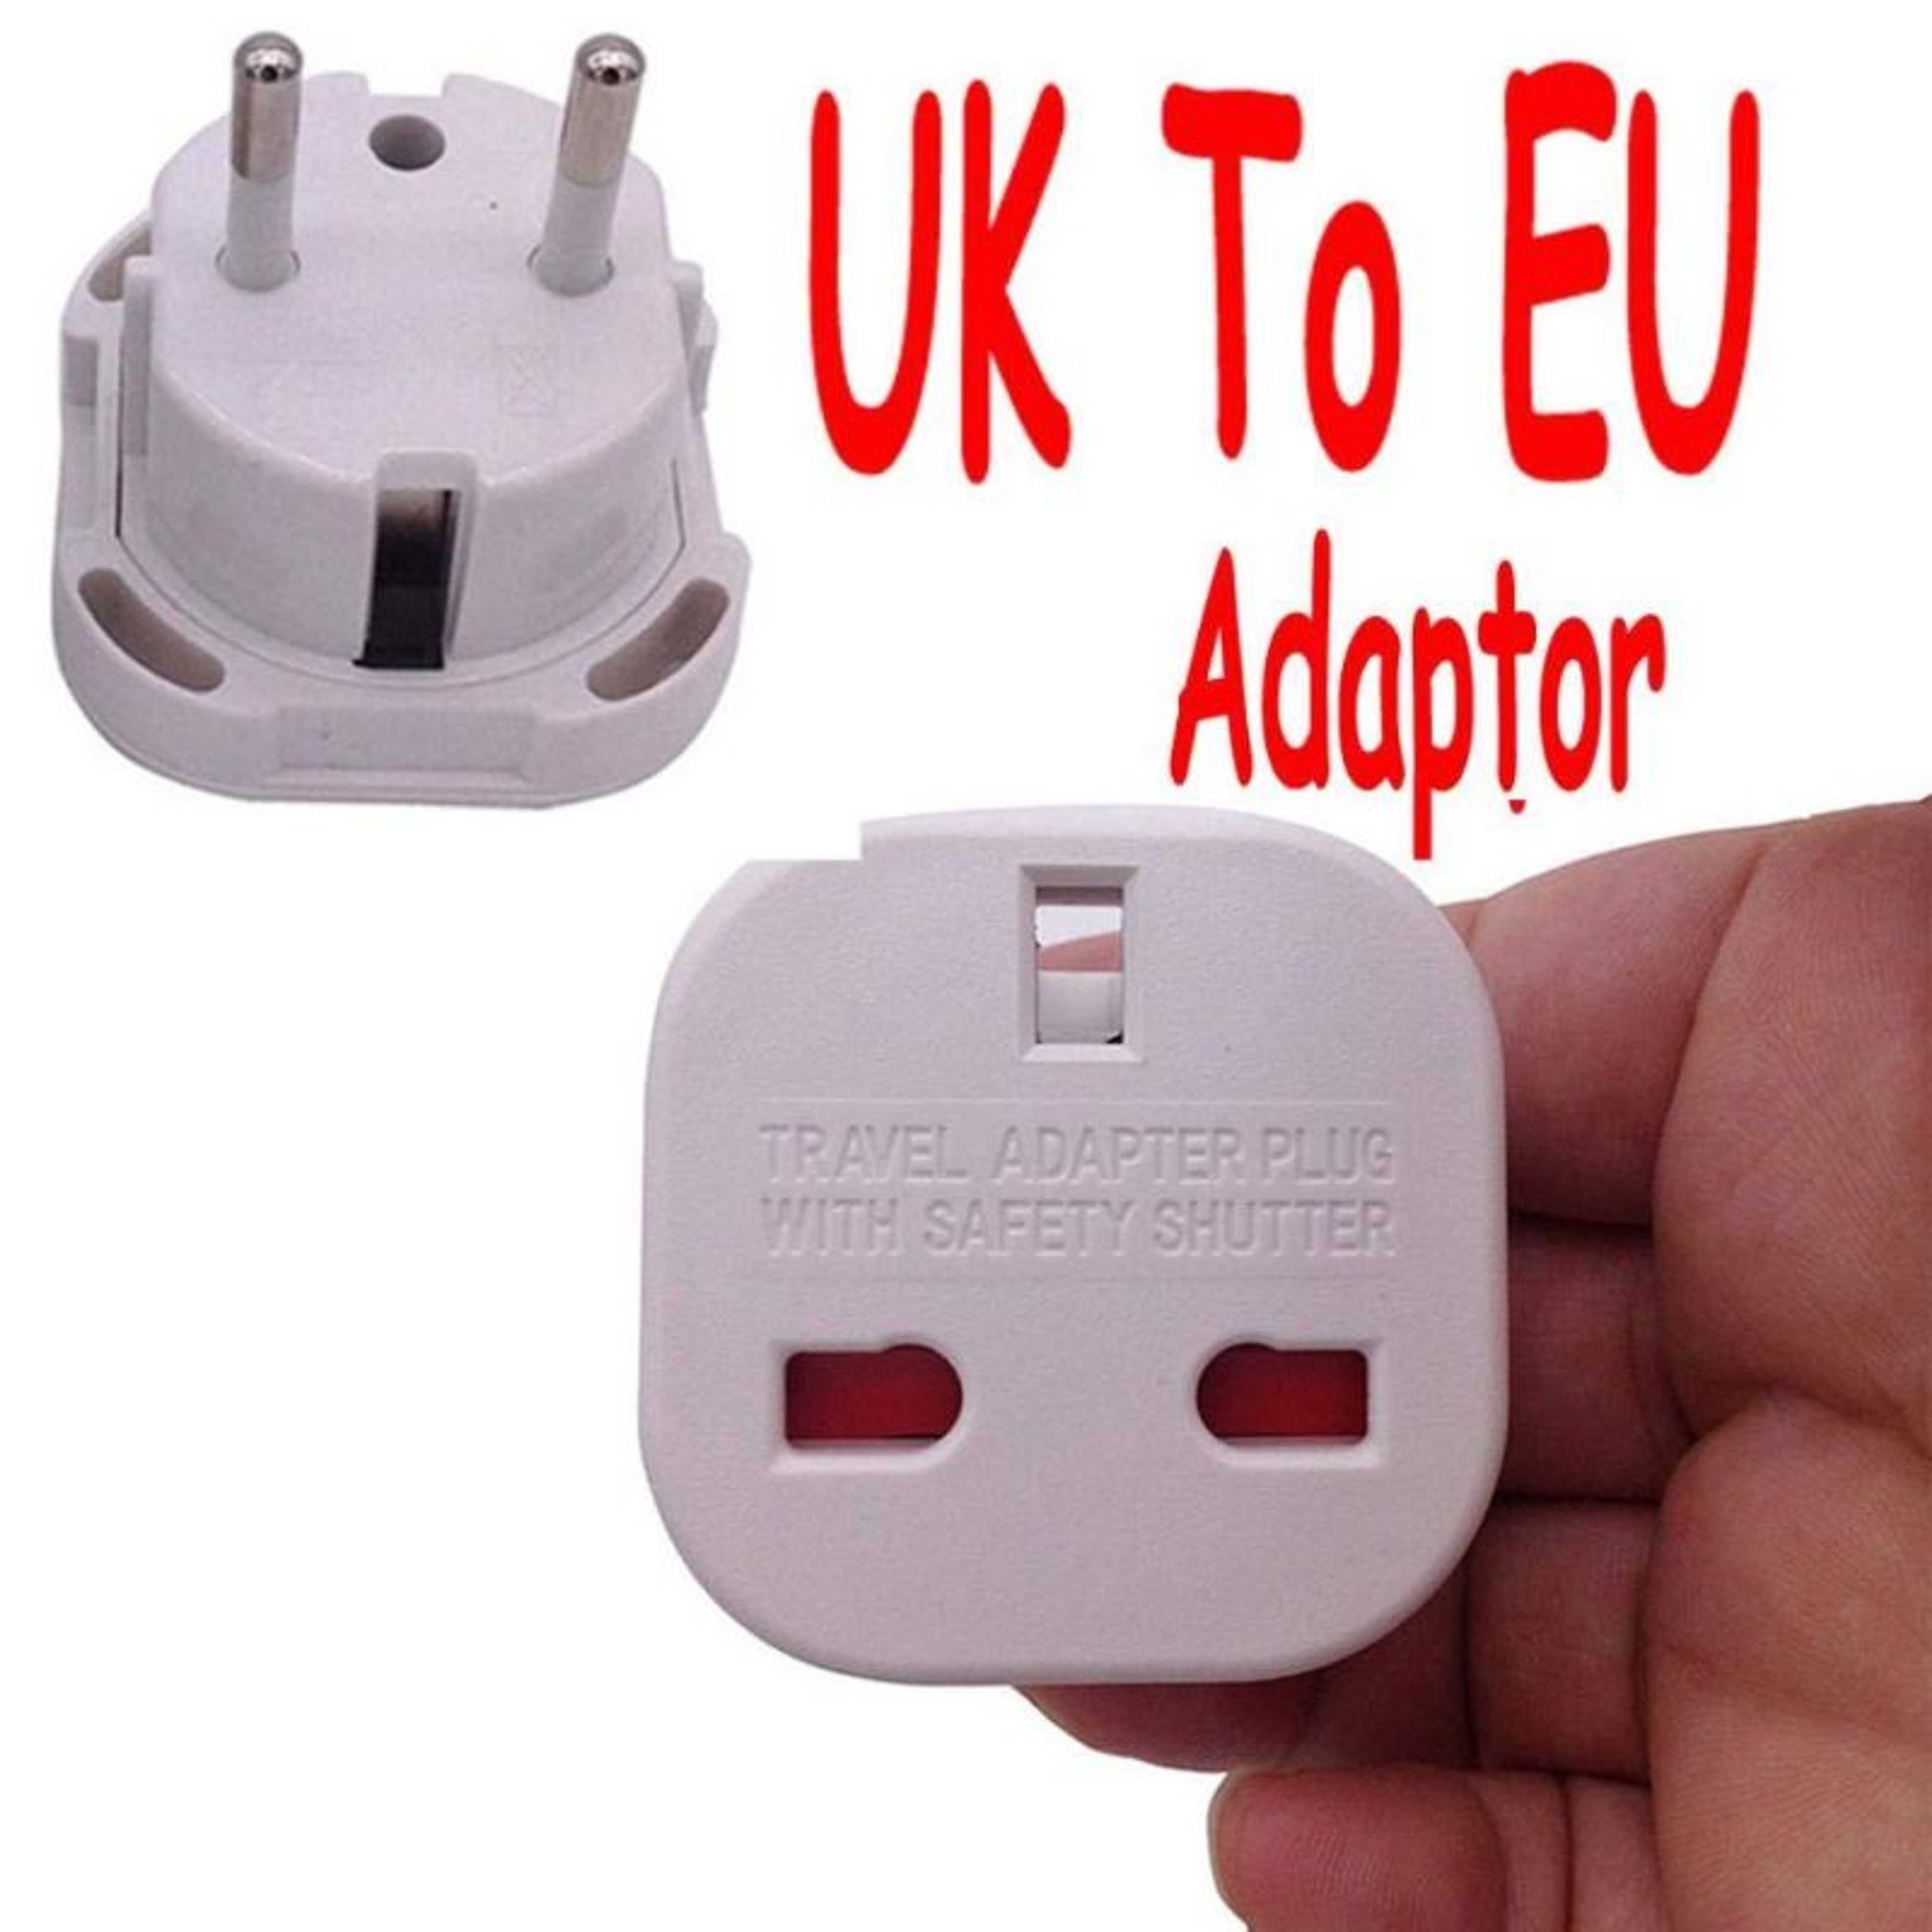 High Performance Universal UK/EU to US Adapter Travel Power Plug Adapter Converter with Safety Shutter